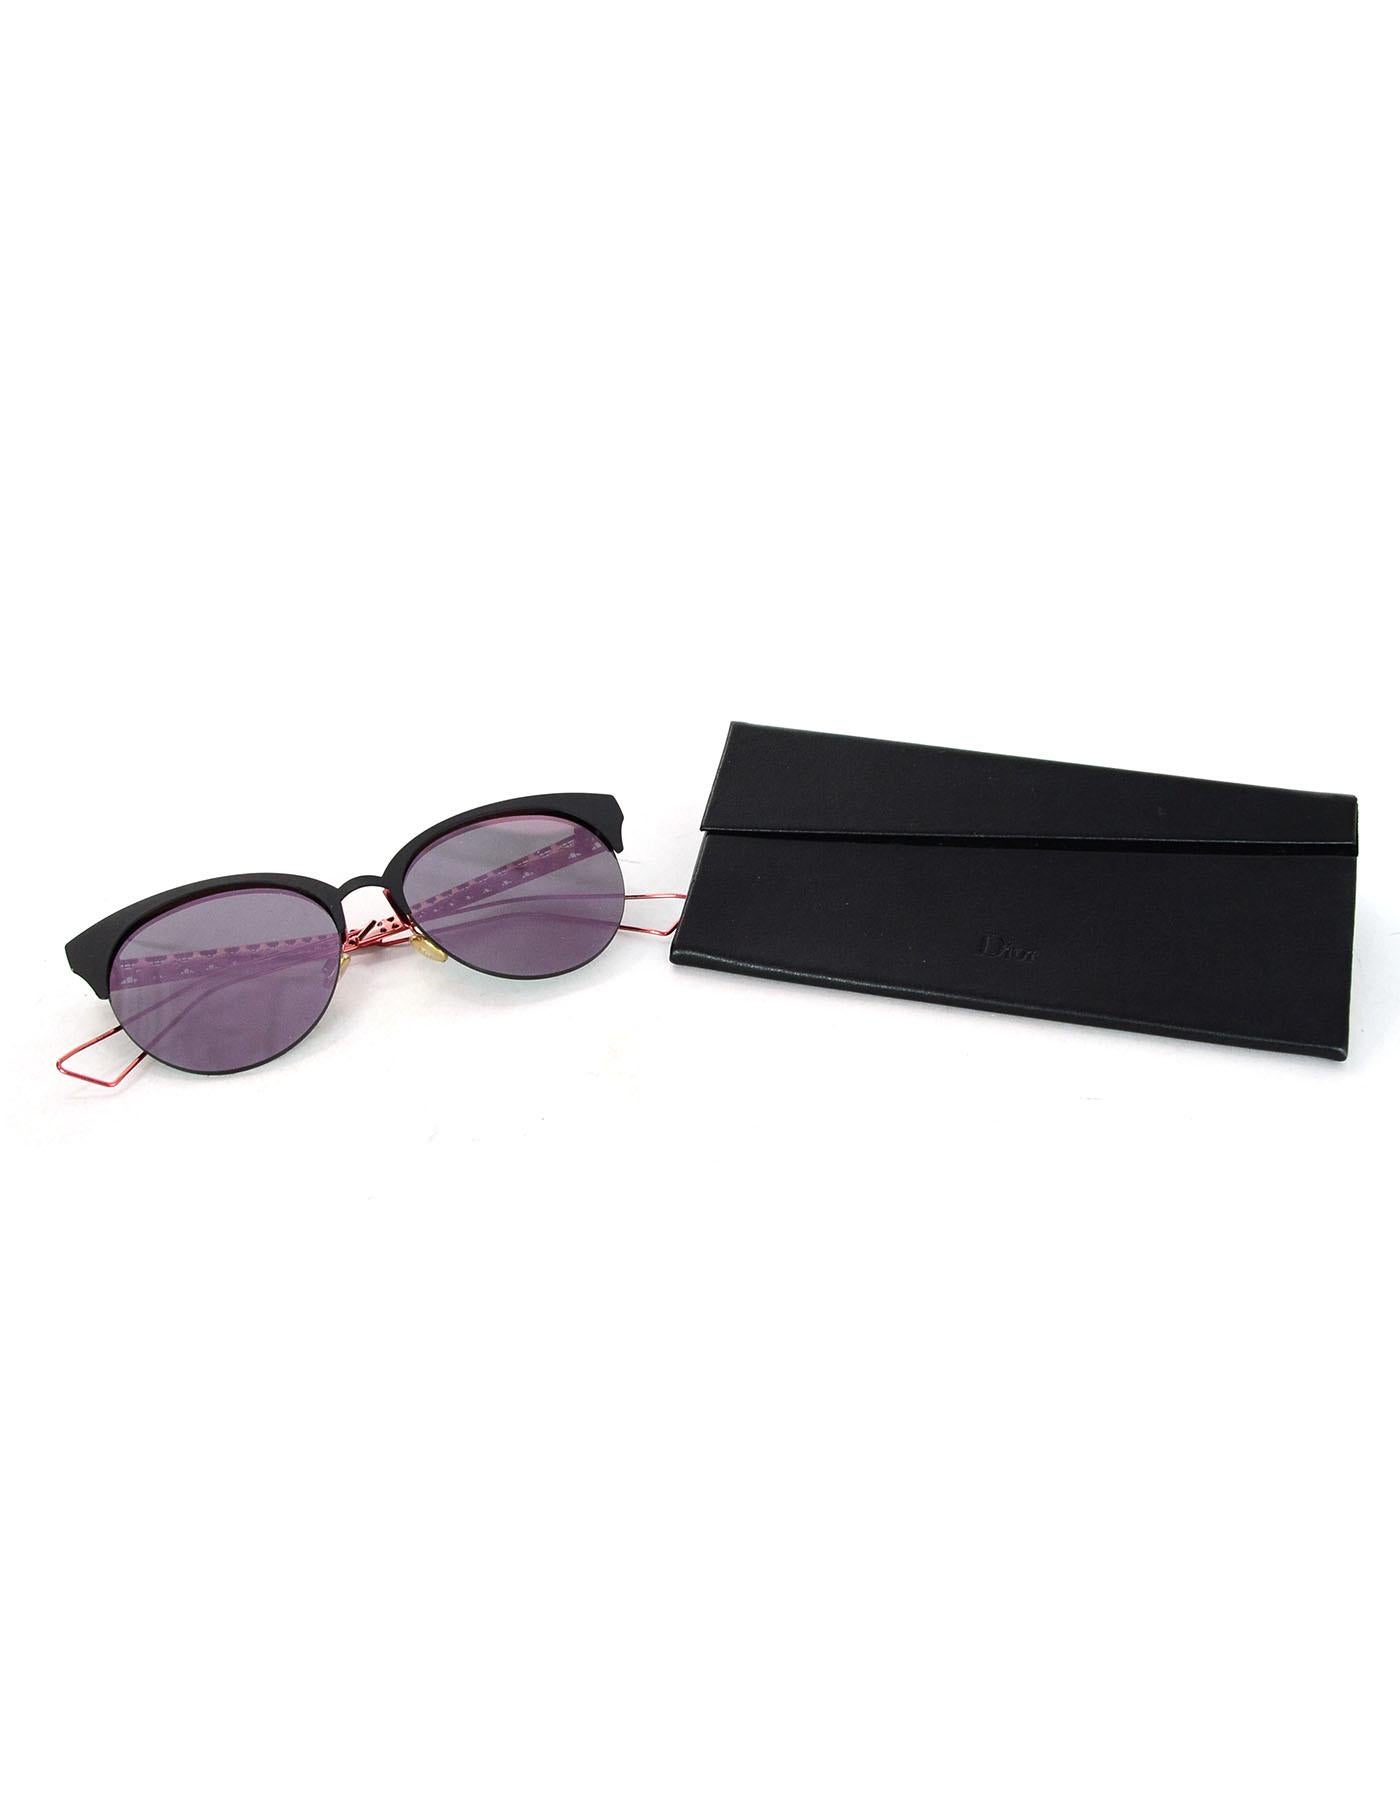 Christian Dior Pink & Black Diorama Mirrored Sunglasses with Case 2